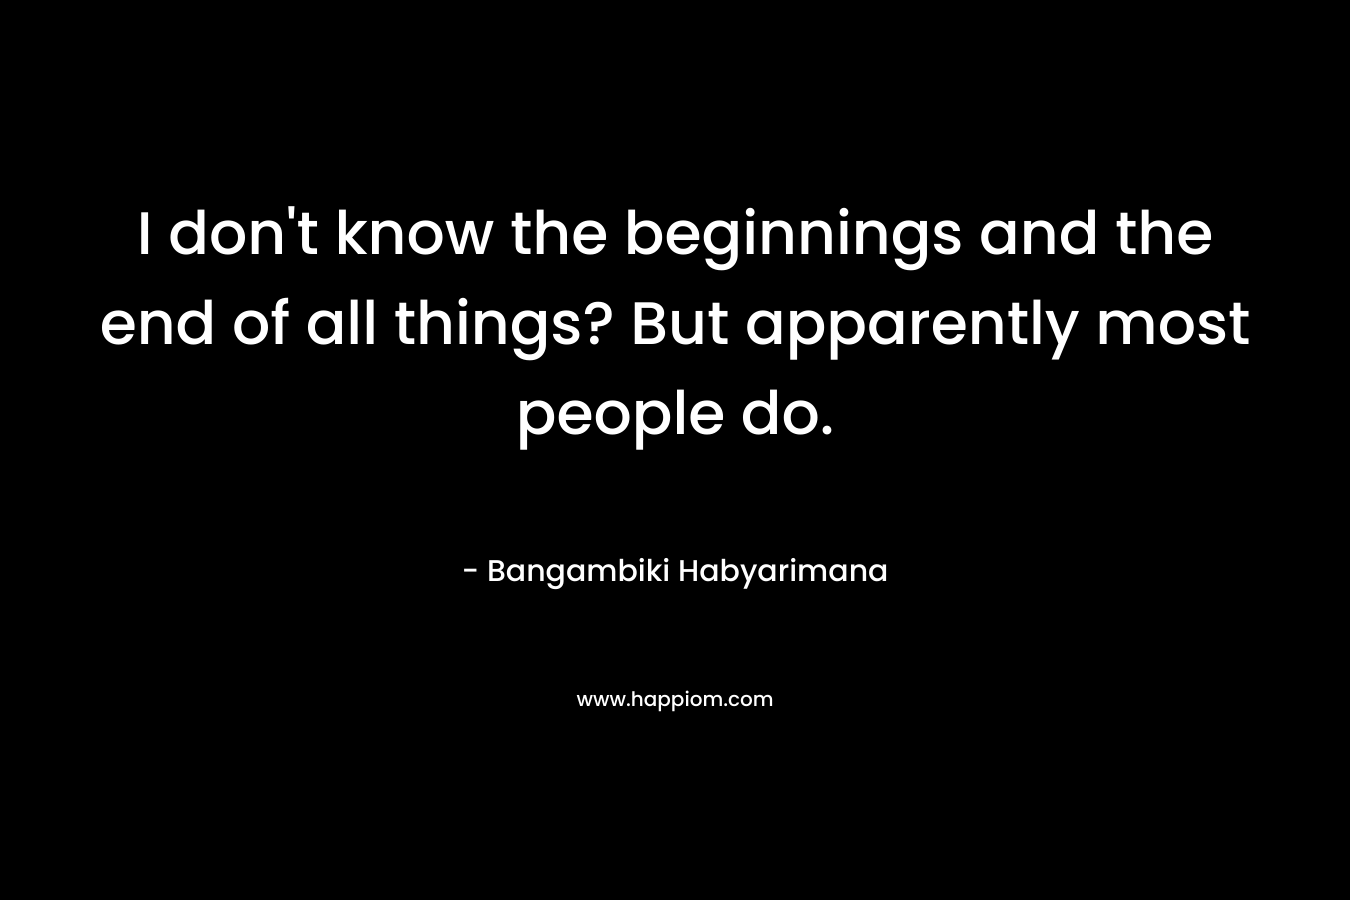 I don't know the beginnings and the end of all things? But apparently most people do.